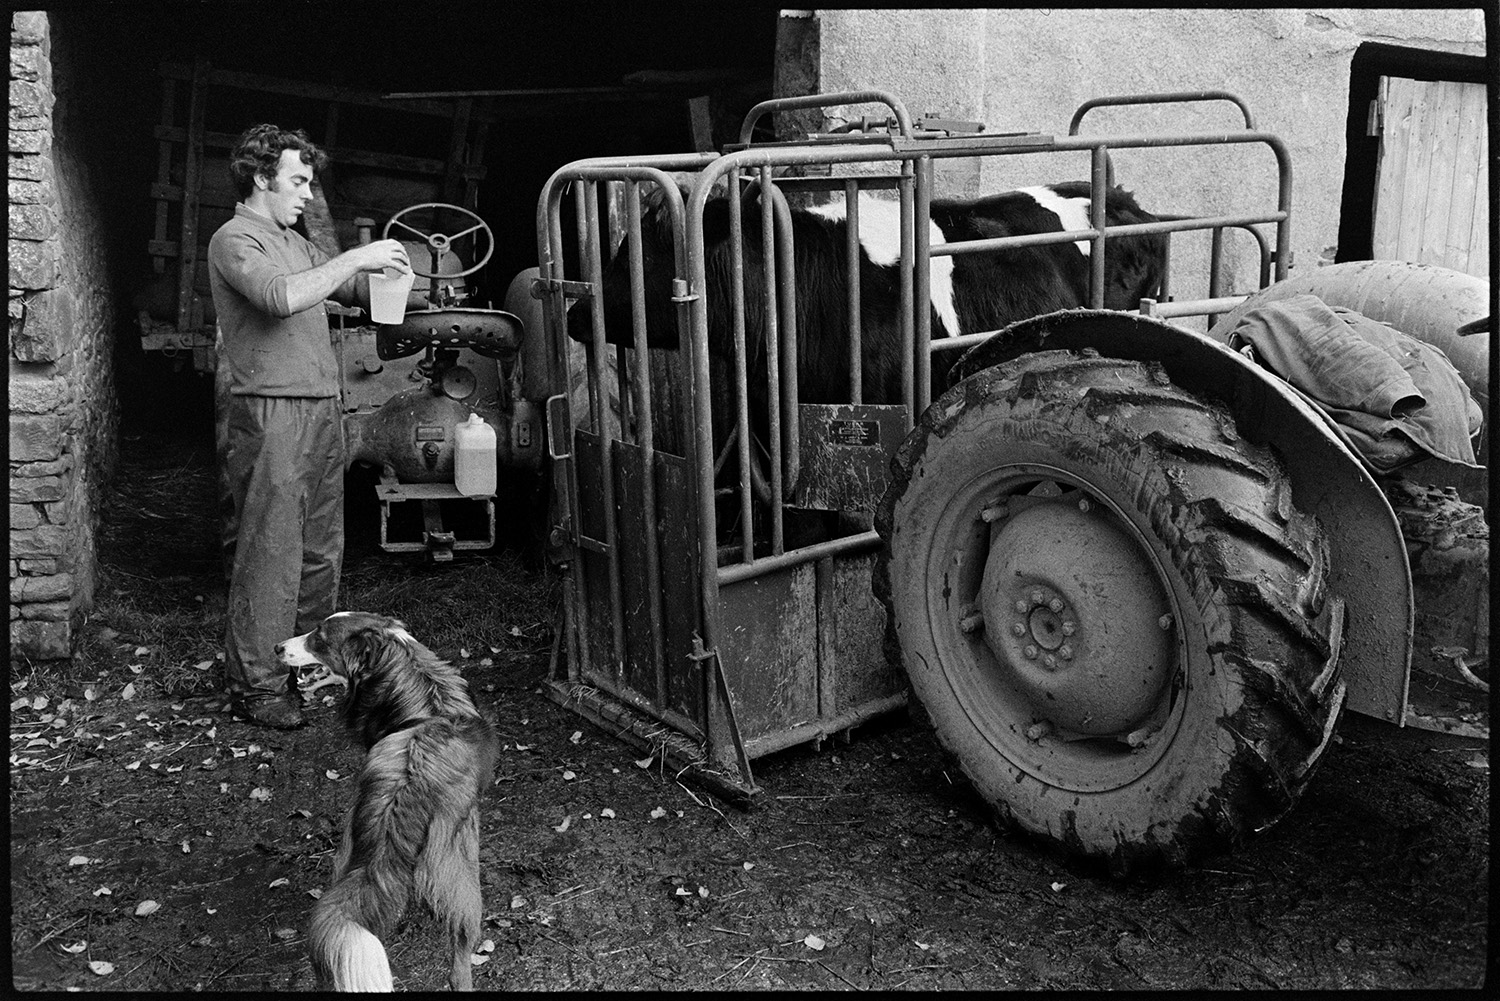 Cow being dowsed in crush.
[A cow standing in a cattle crush at the back of tractor in a farmyard while Graham Ward measures doses of medicine, at Parsonage Iddesleigh. A dog is in the foreground.]